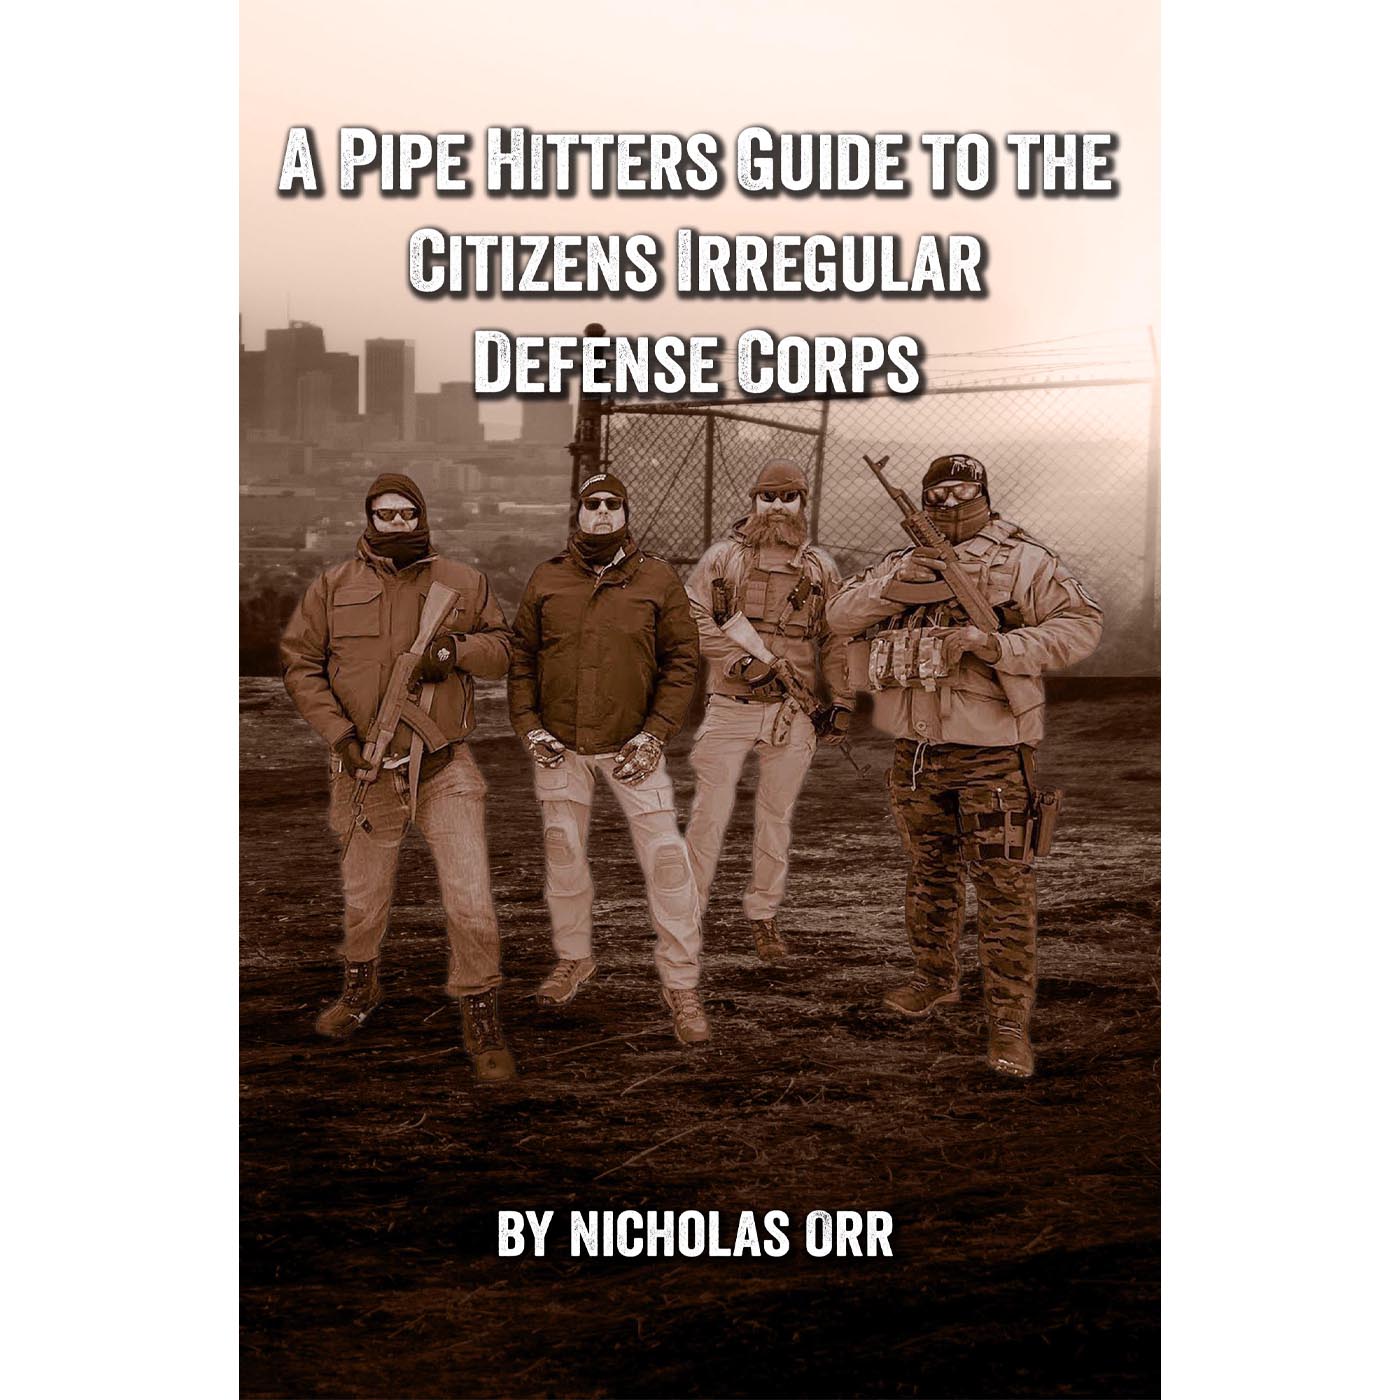 Pipe Hitters Guide to the Citizens Irregular Defense Corps (PHG Book 2)